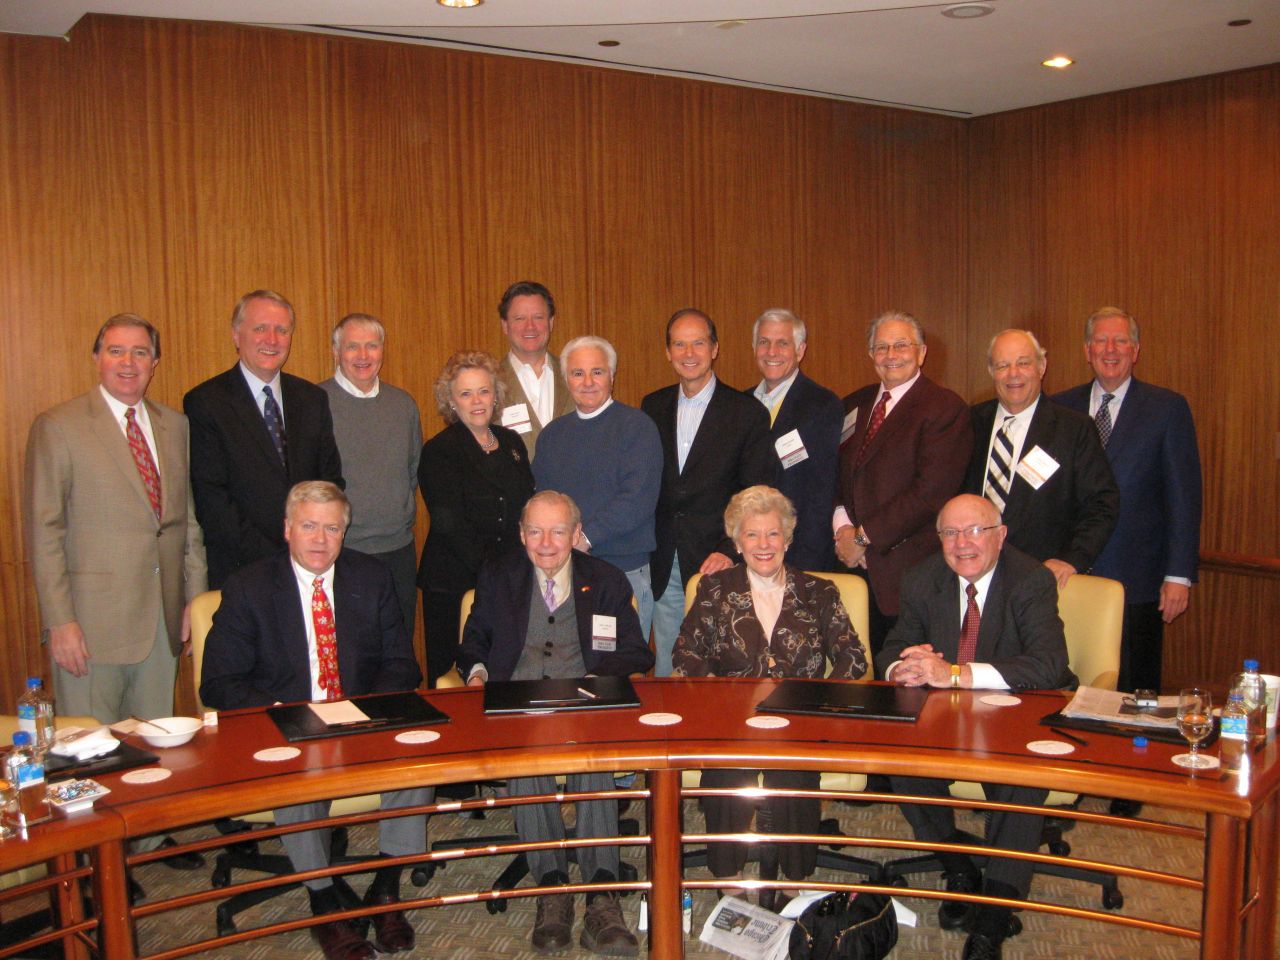 ISBA past presidents at a breakfast before the Assembly